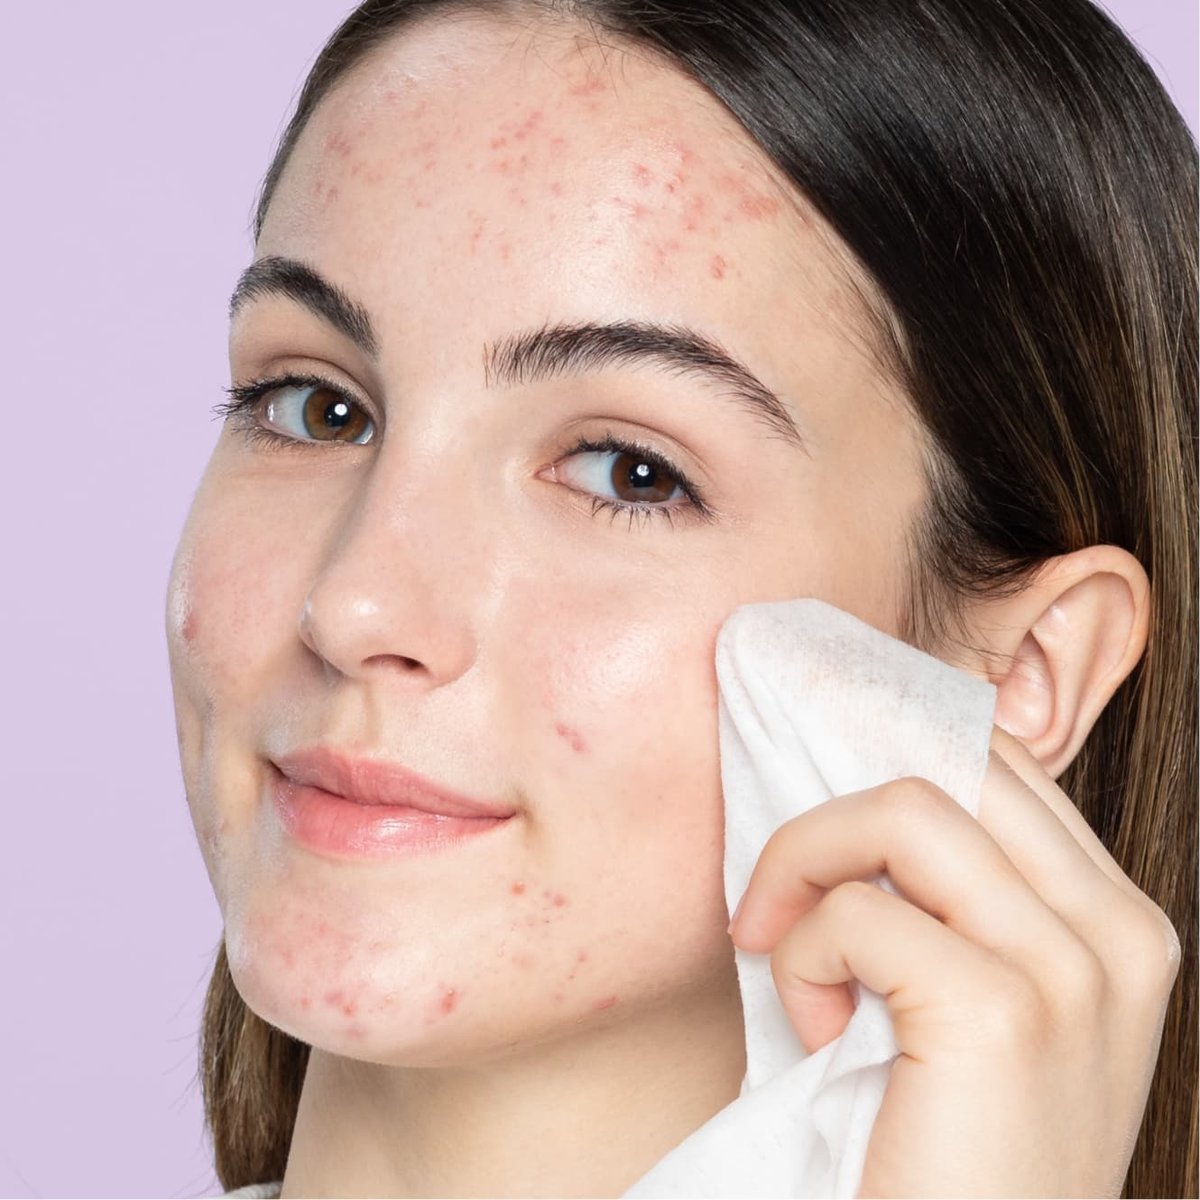 Young teen with brown eyes and brown hair with acne wipes cheek with lemon facial cleansing wipe in front of purple background